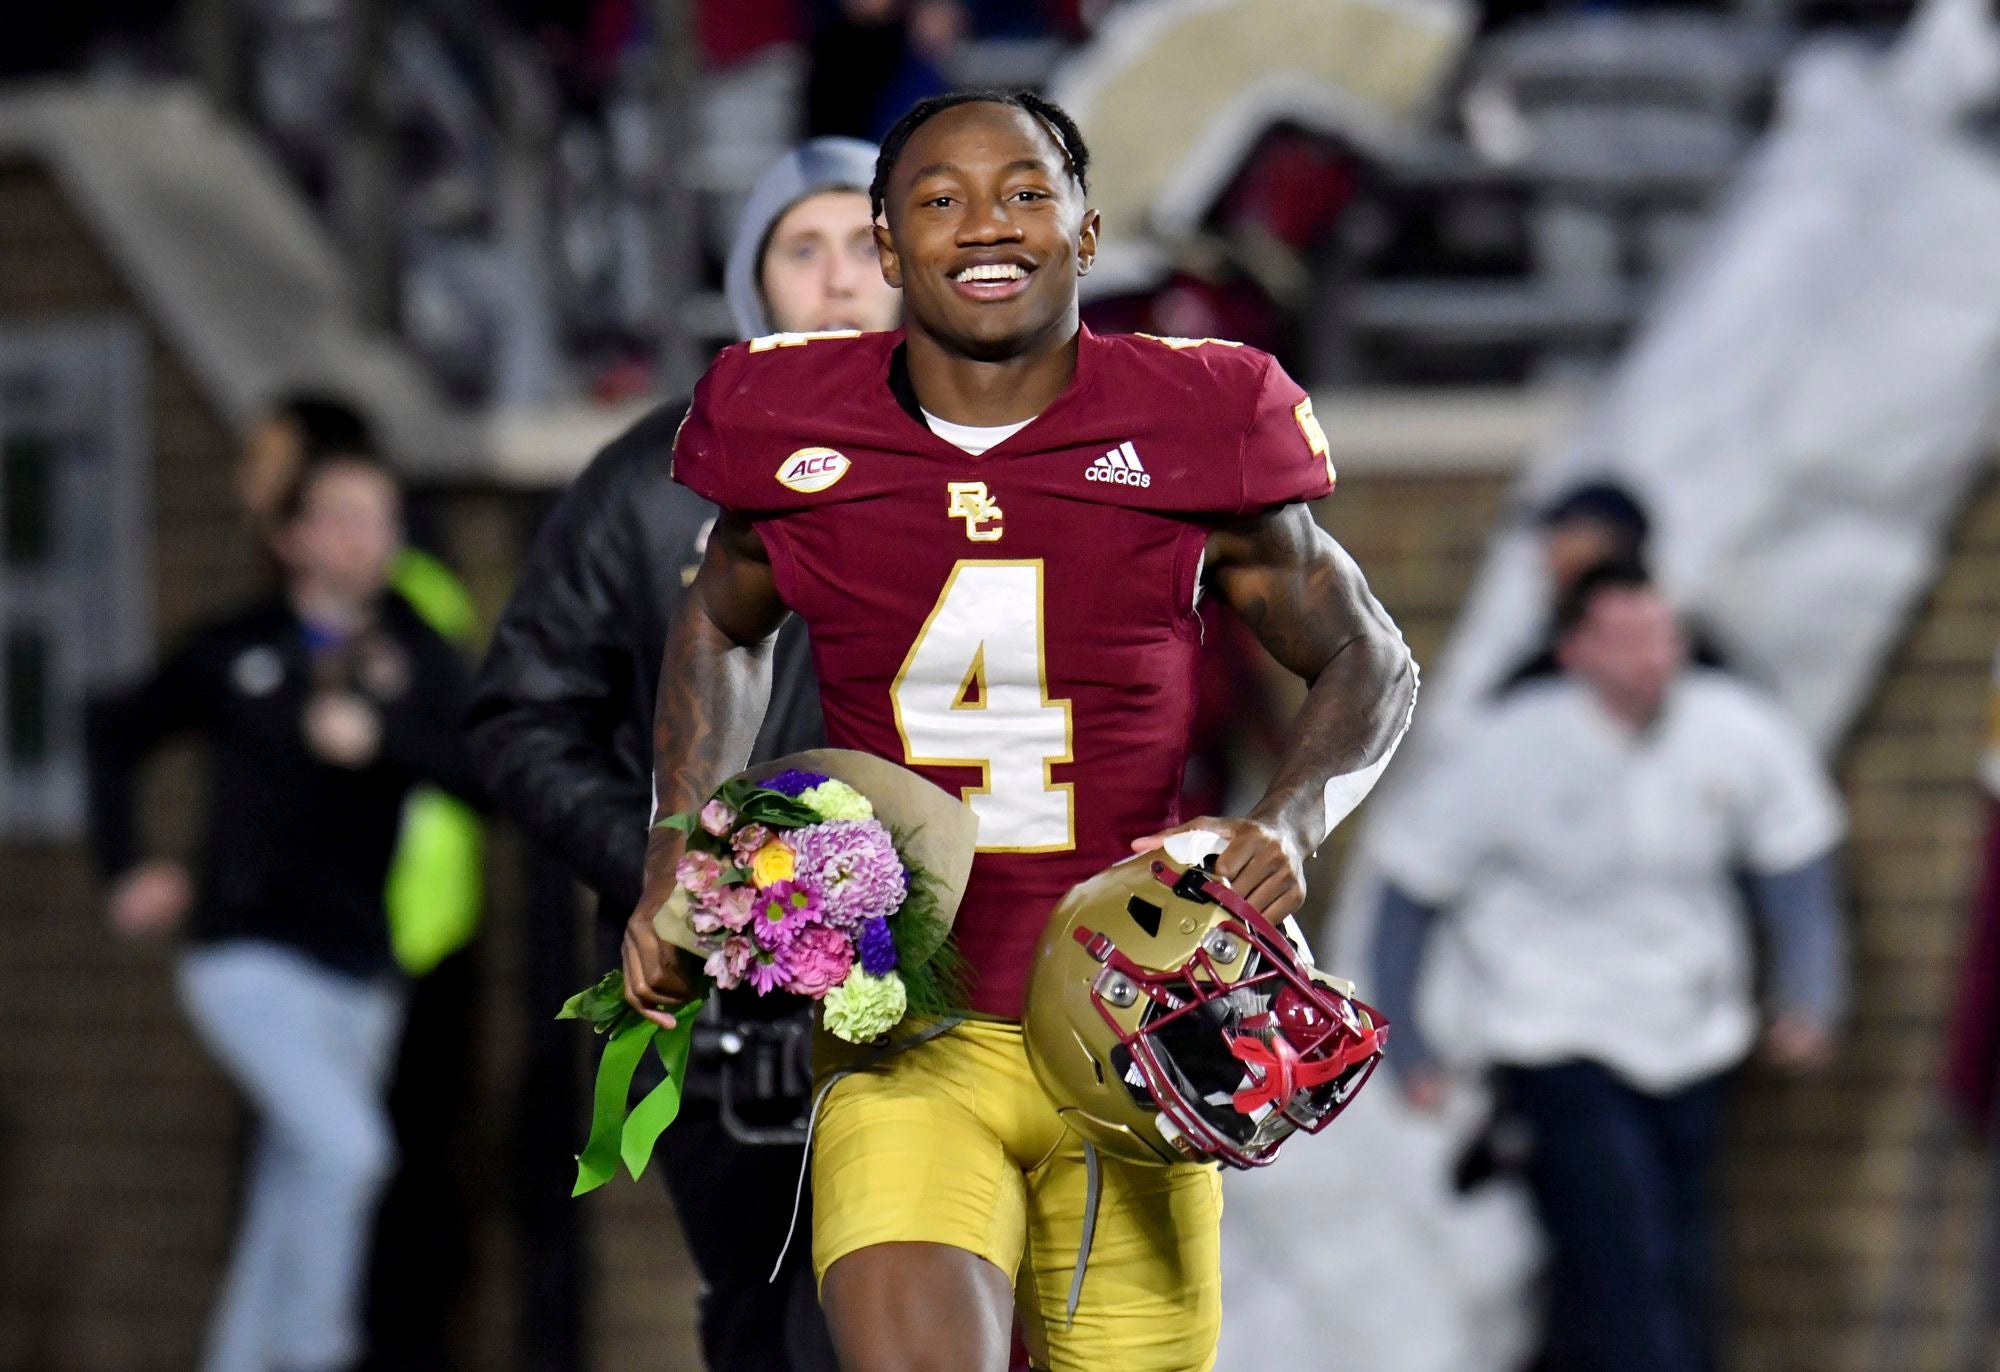 BC's Zay Flowers could be a pick, per NFL Draft expert